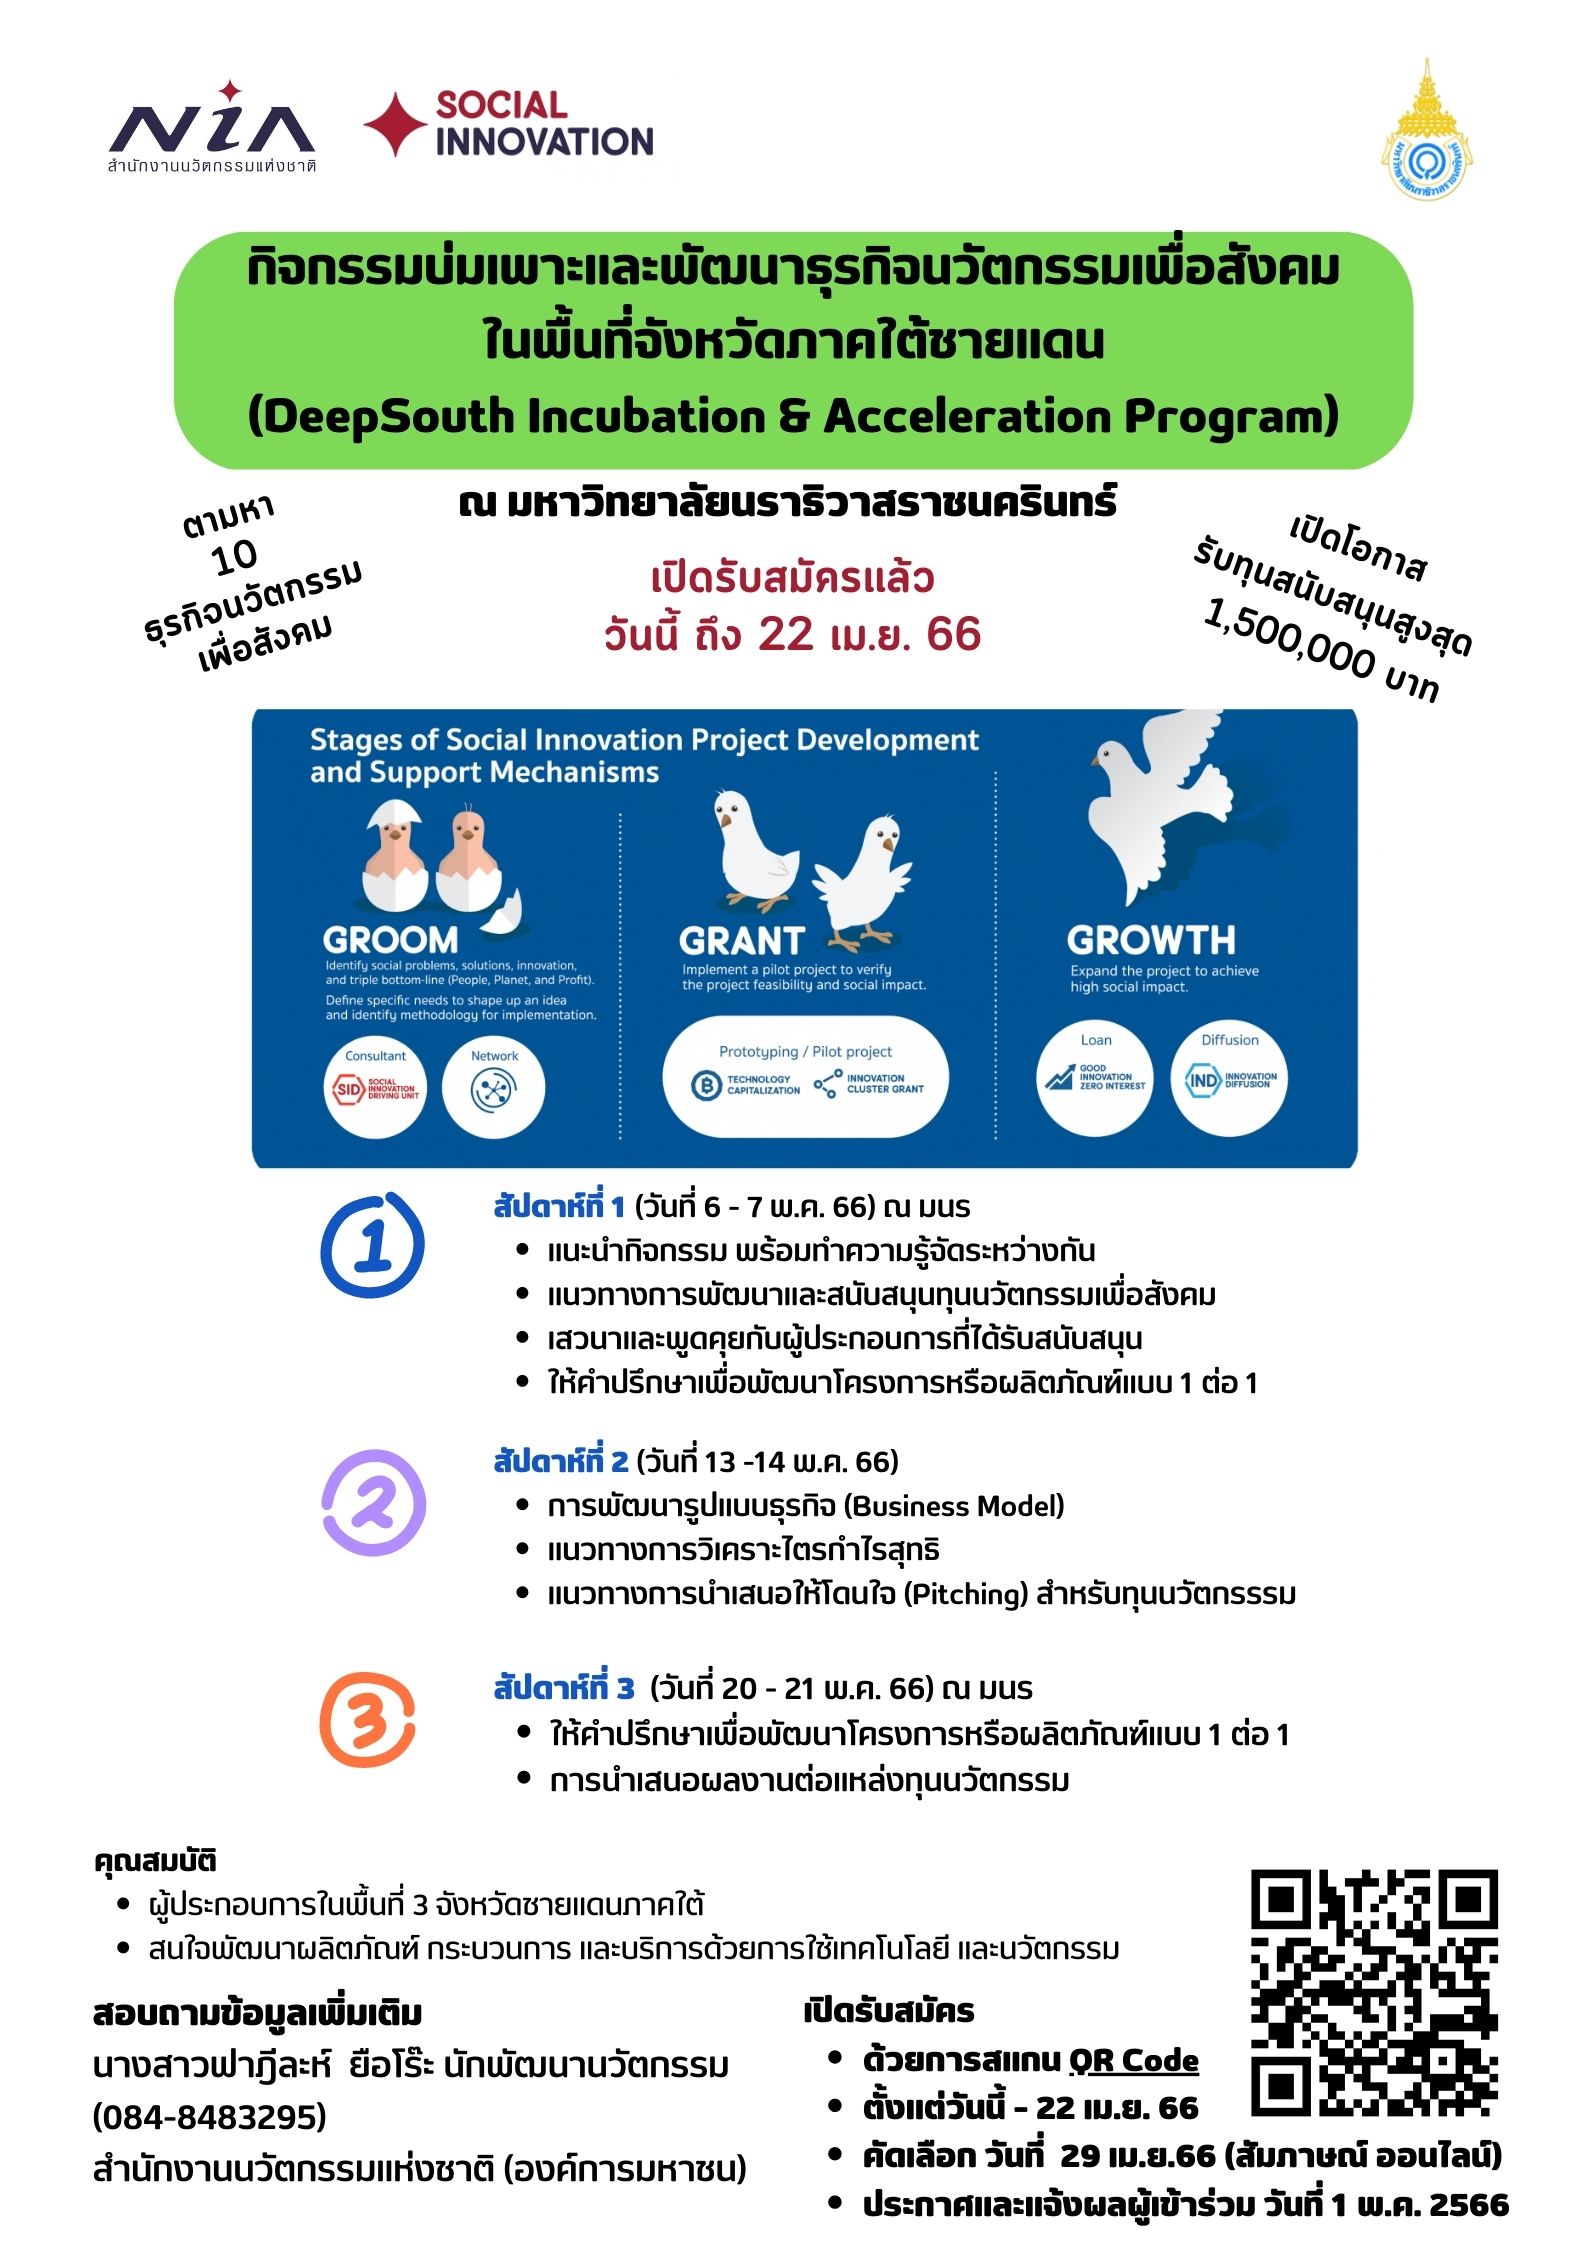 Deep South Incubation and Acceleration Program